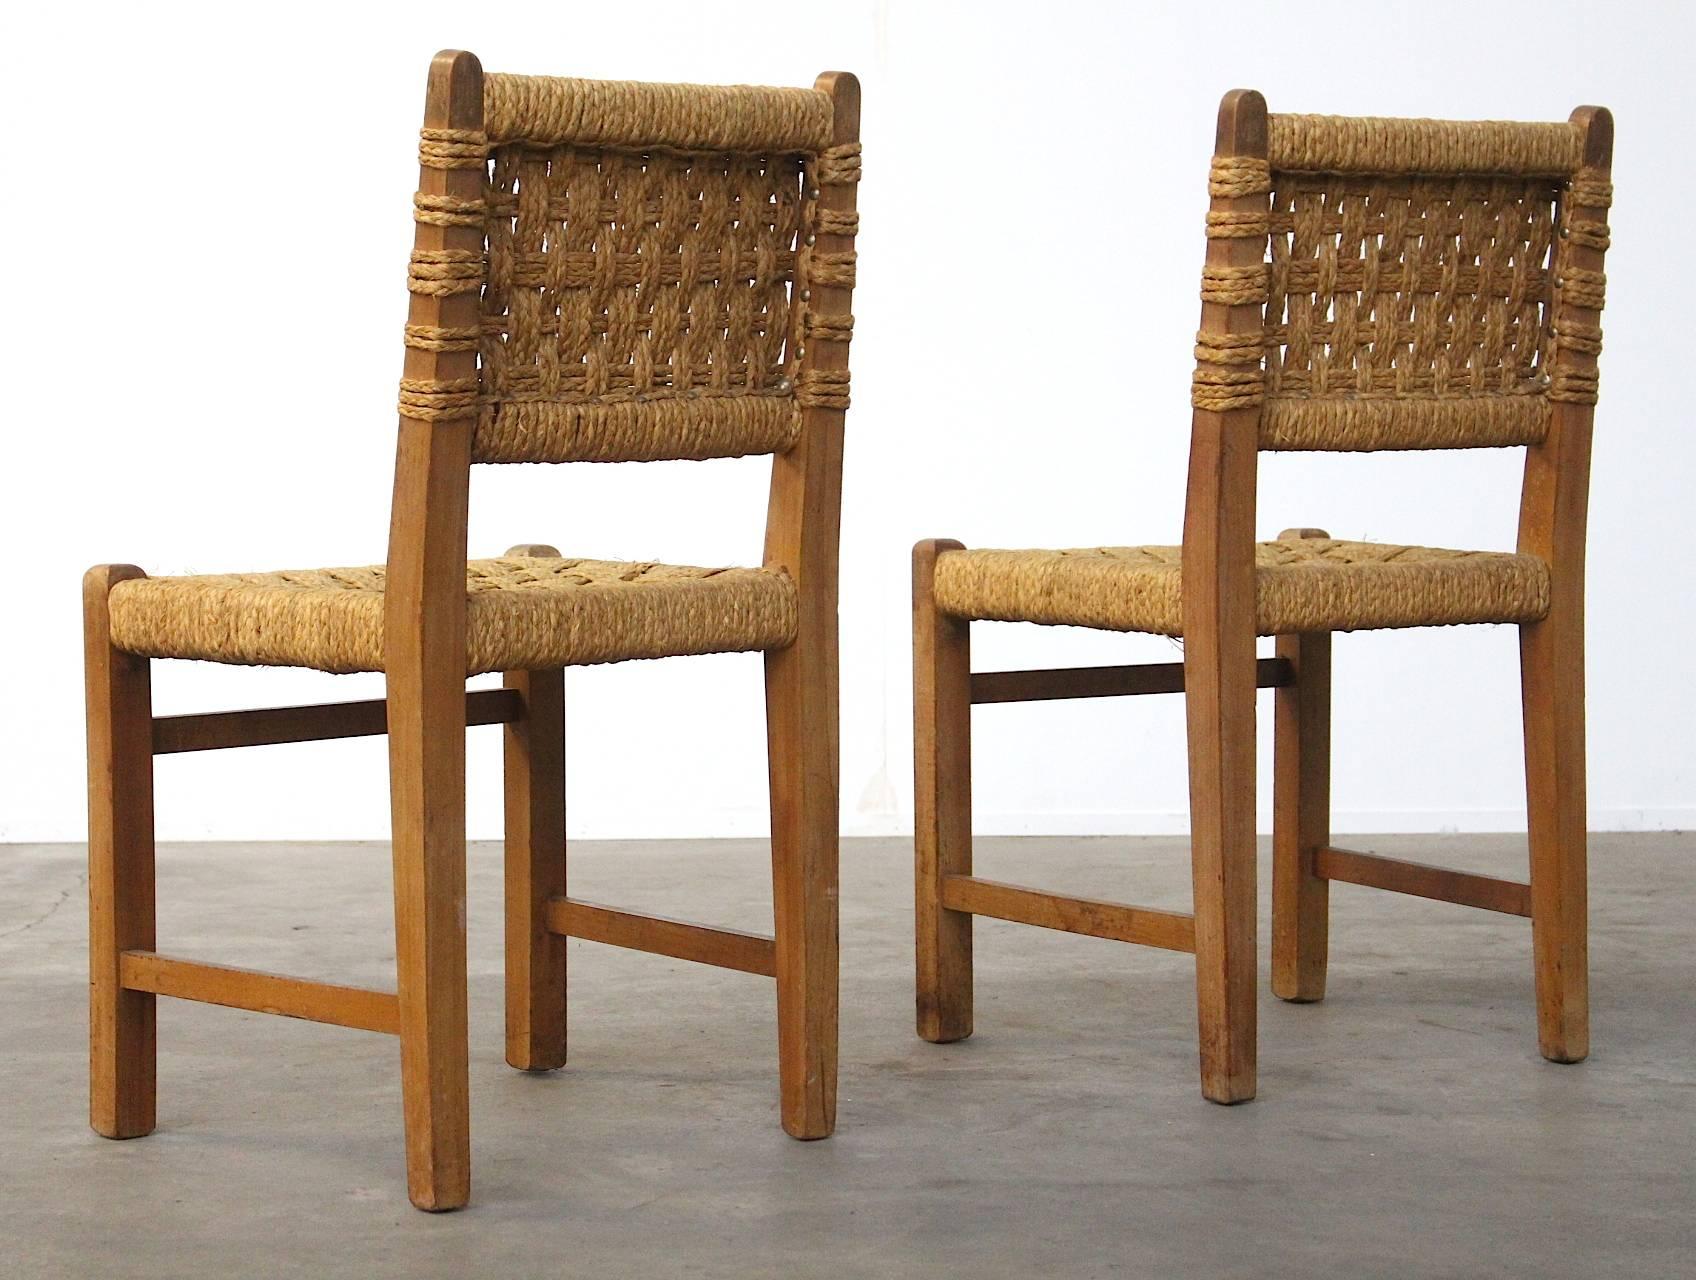 A stunning pair of oakwood and rope/ sisal side chairs by the designer couple Adrien Audoux and Frida Minet; manufactured in the 1950s in Marseille, France. Beautiful minimalistic design with lots of similarities and suggestions to the work of